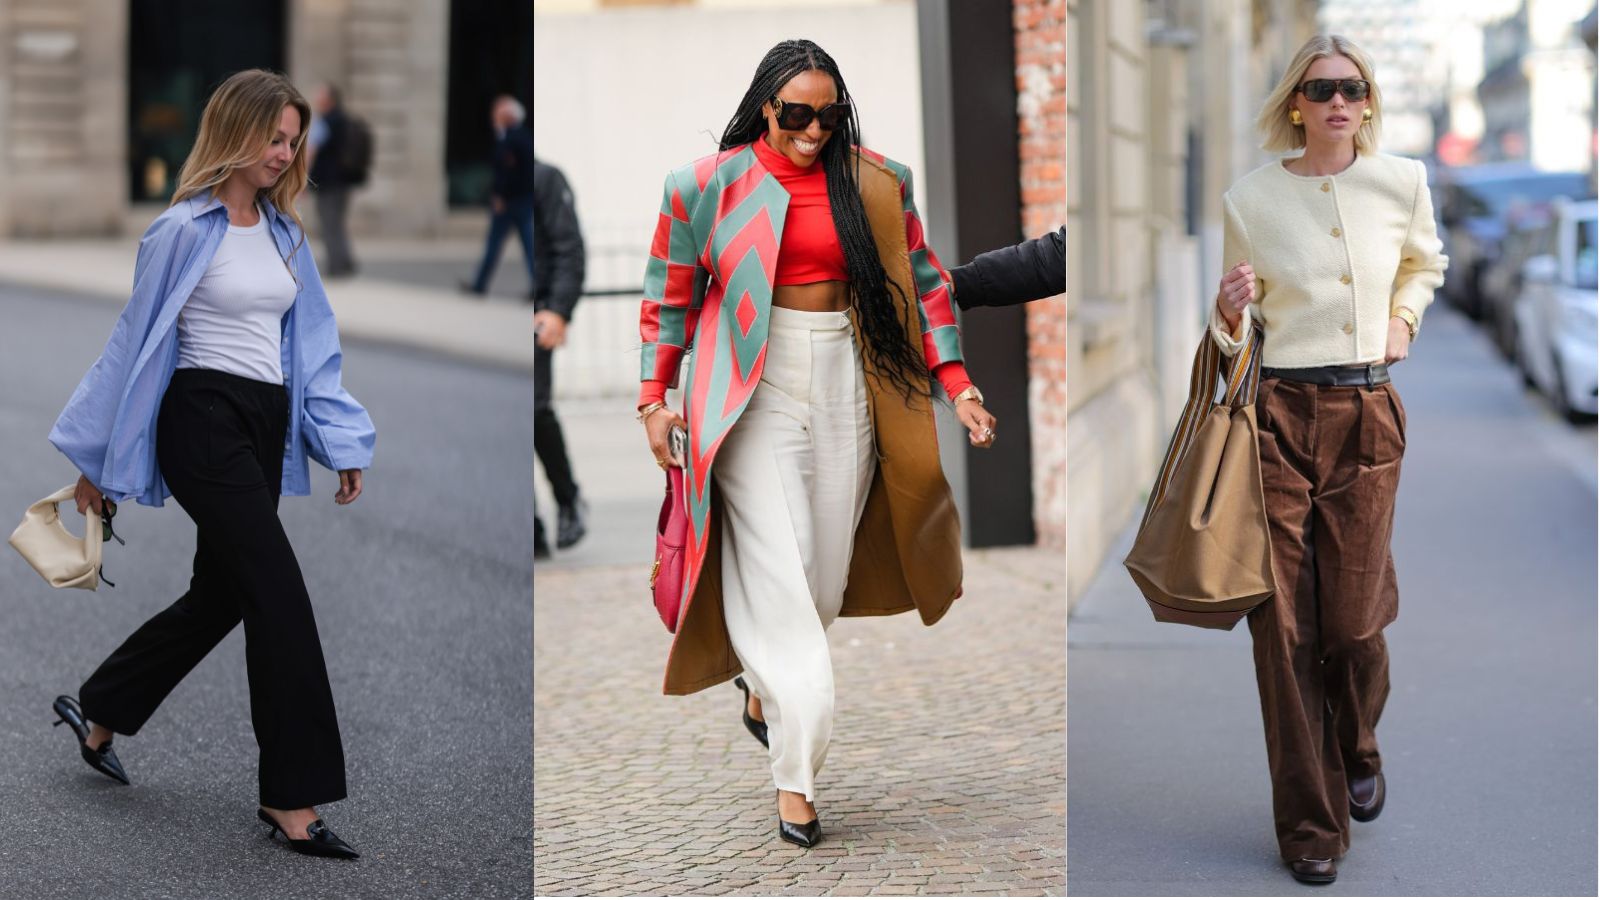 Shoes to wear with wide leg pants: 12 stylish outfit ideas